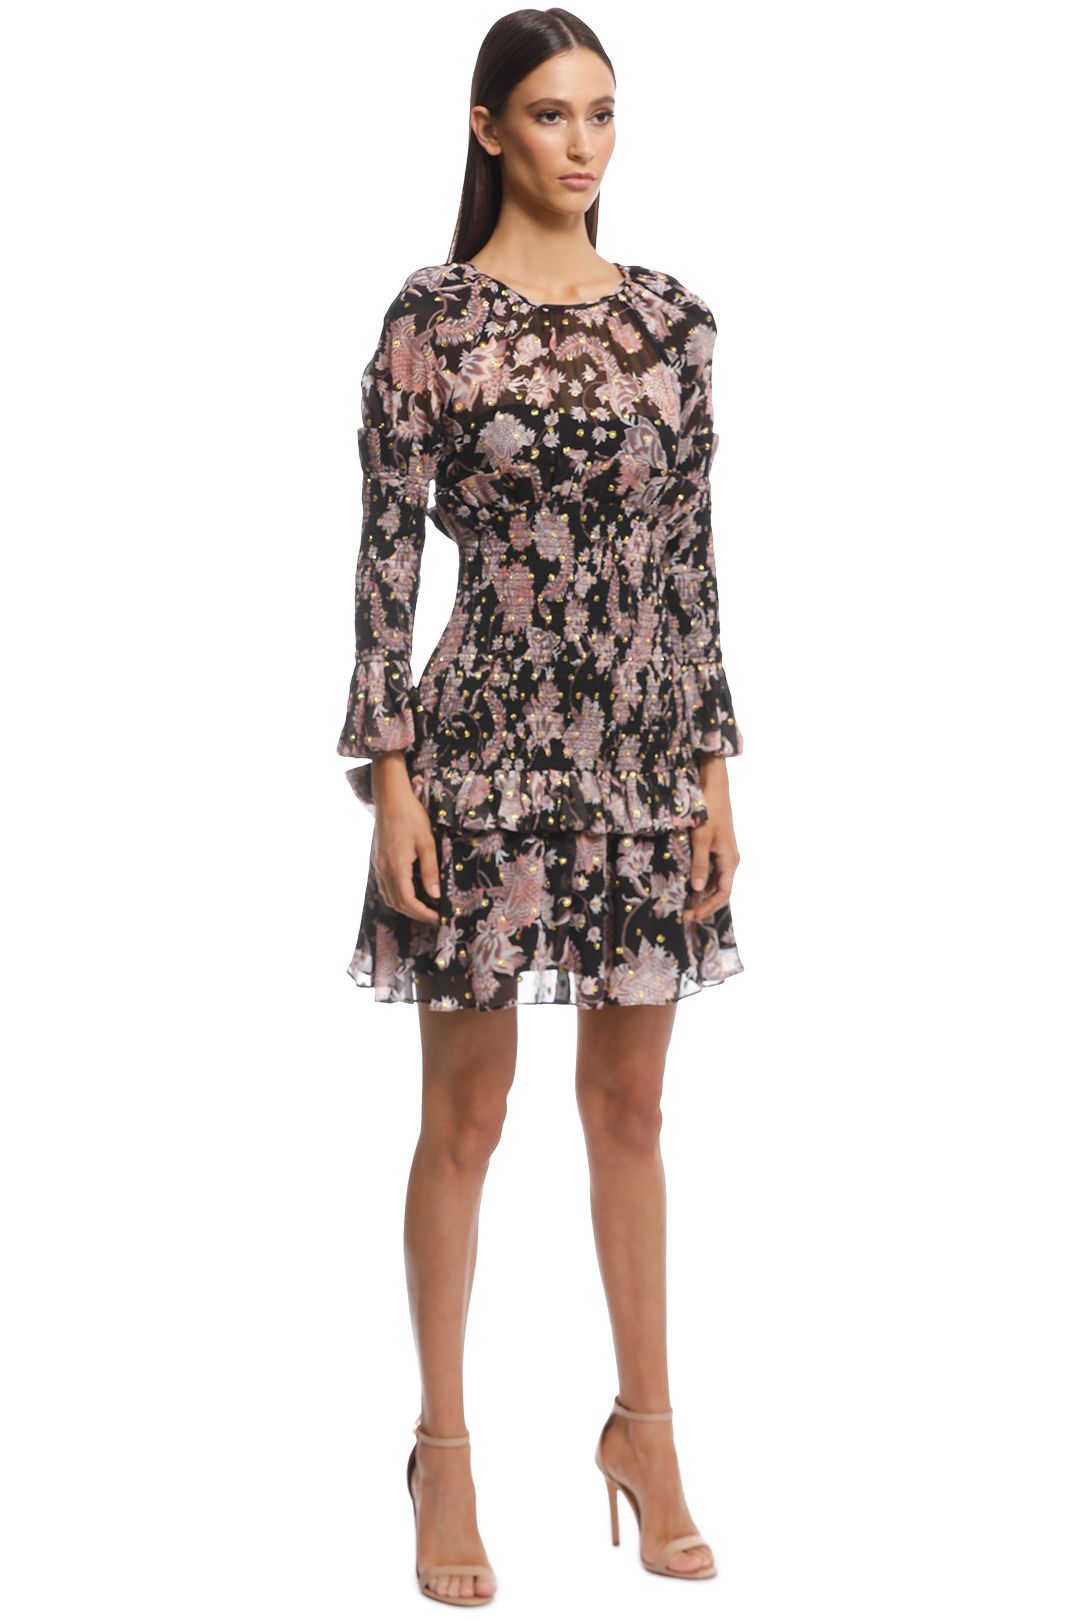 Island Song Mini Print Dress by Thurley for Rent | GlamCorner